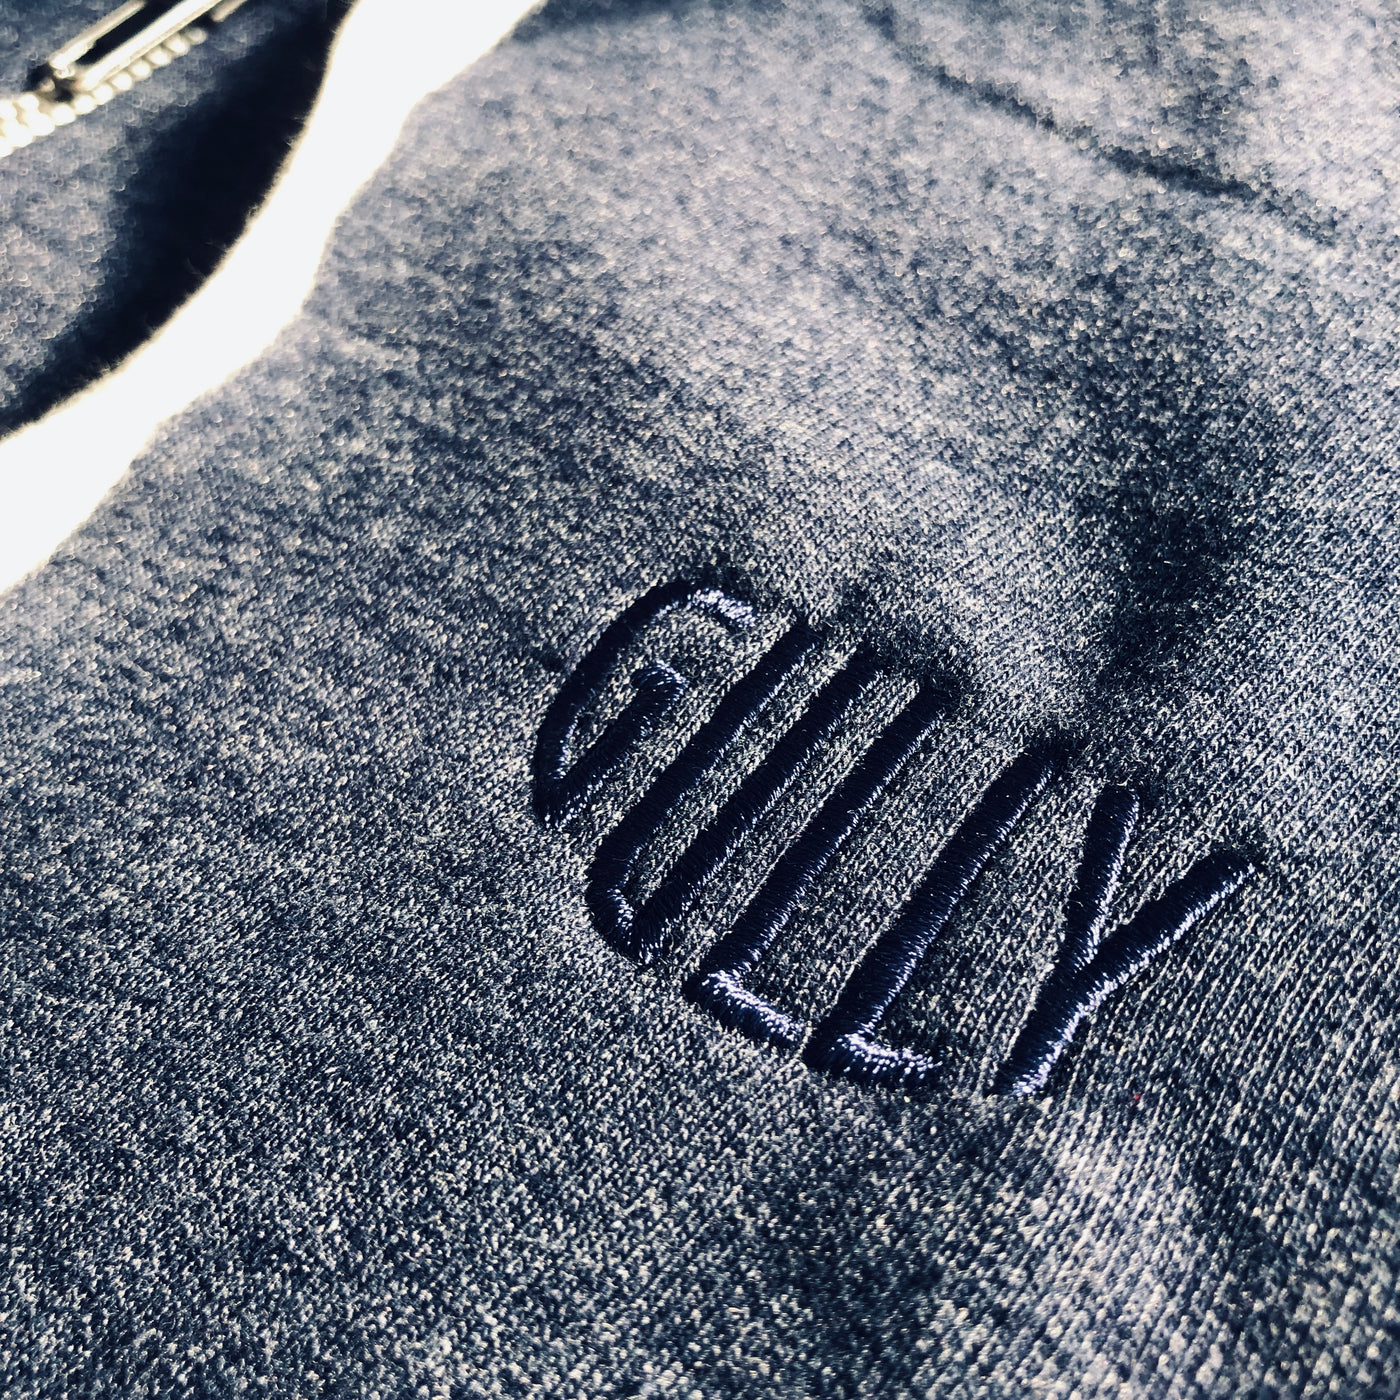 Gully Stealth Zip-up Hoodie (Limited edition)